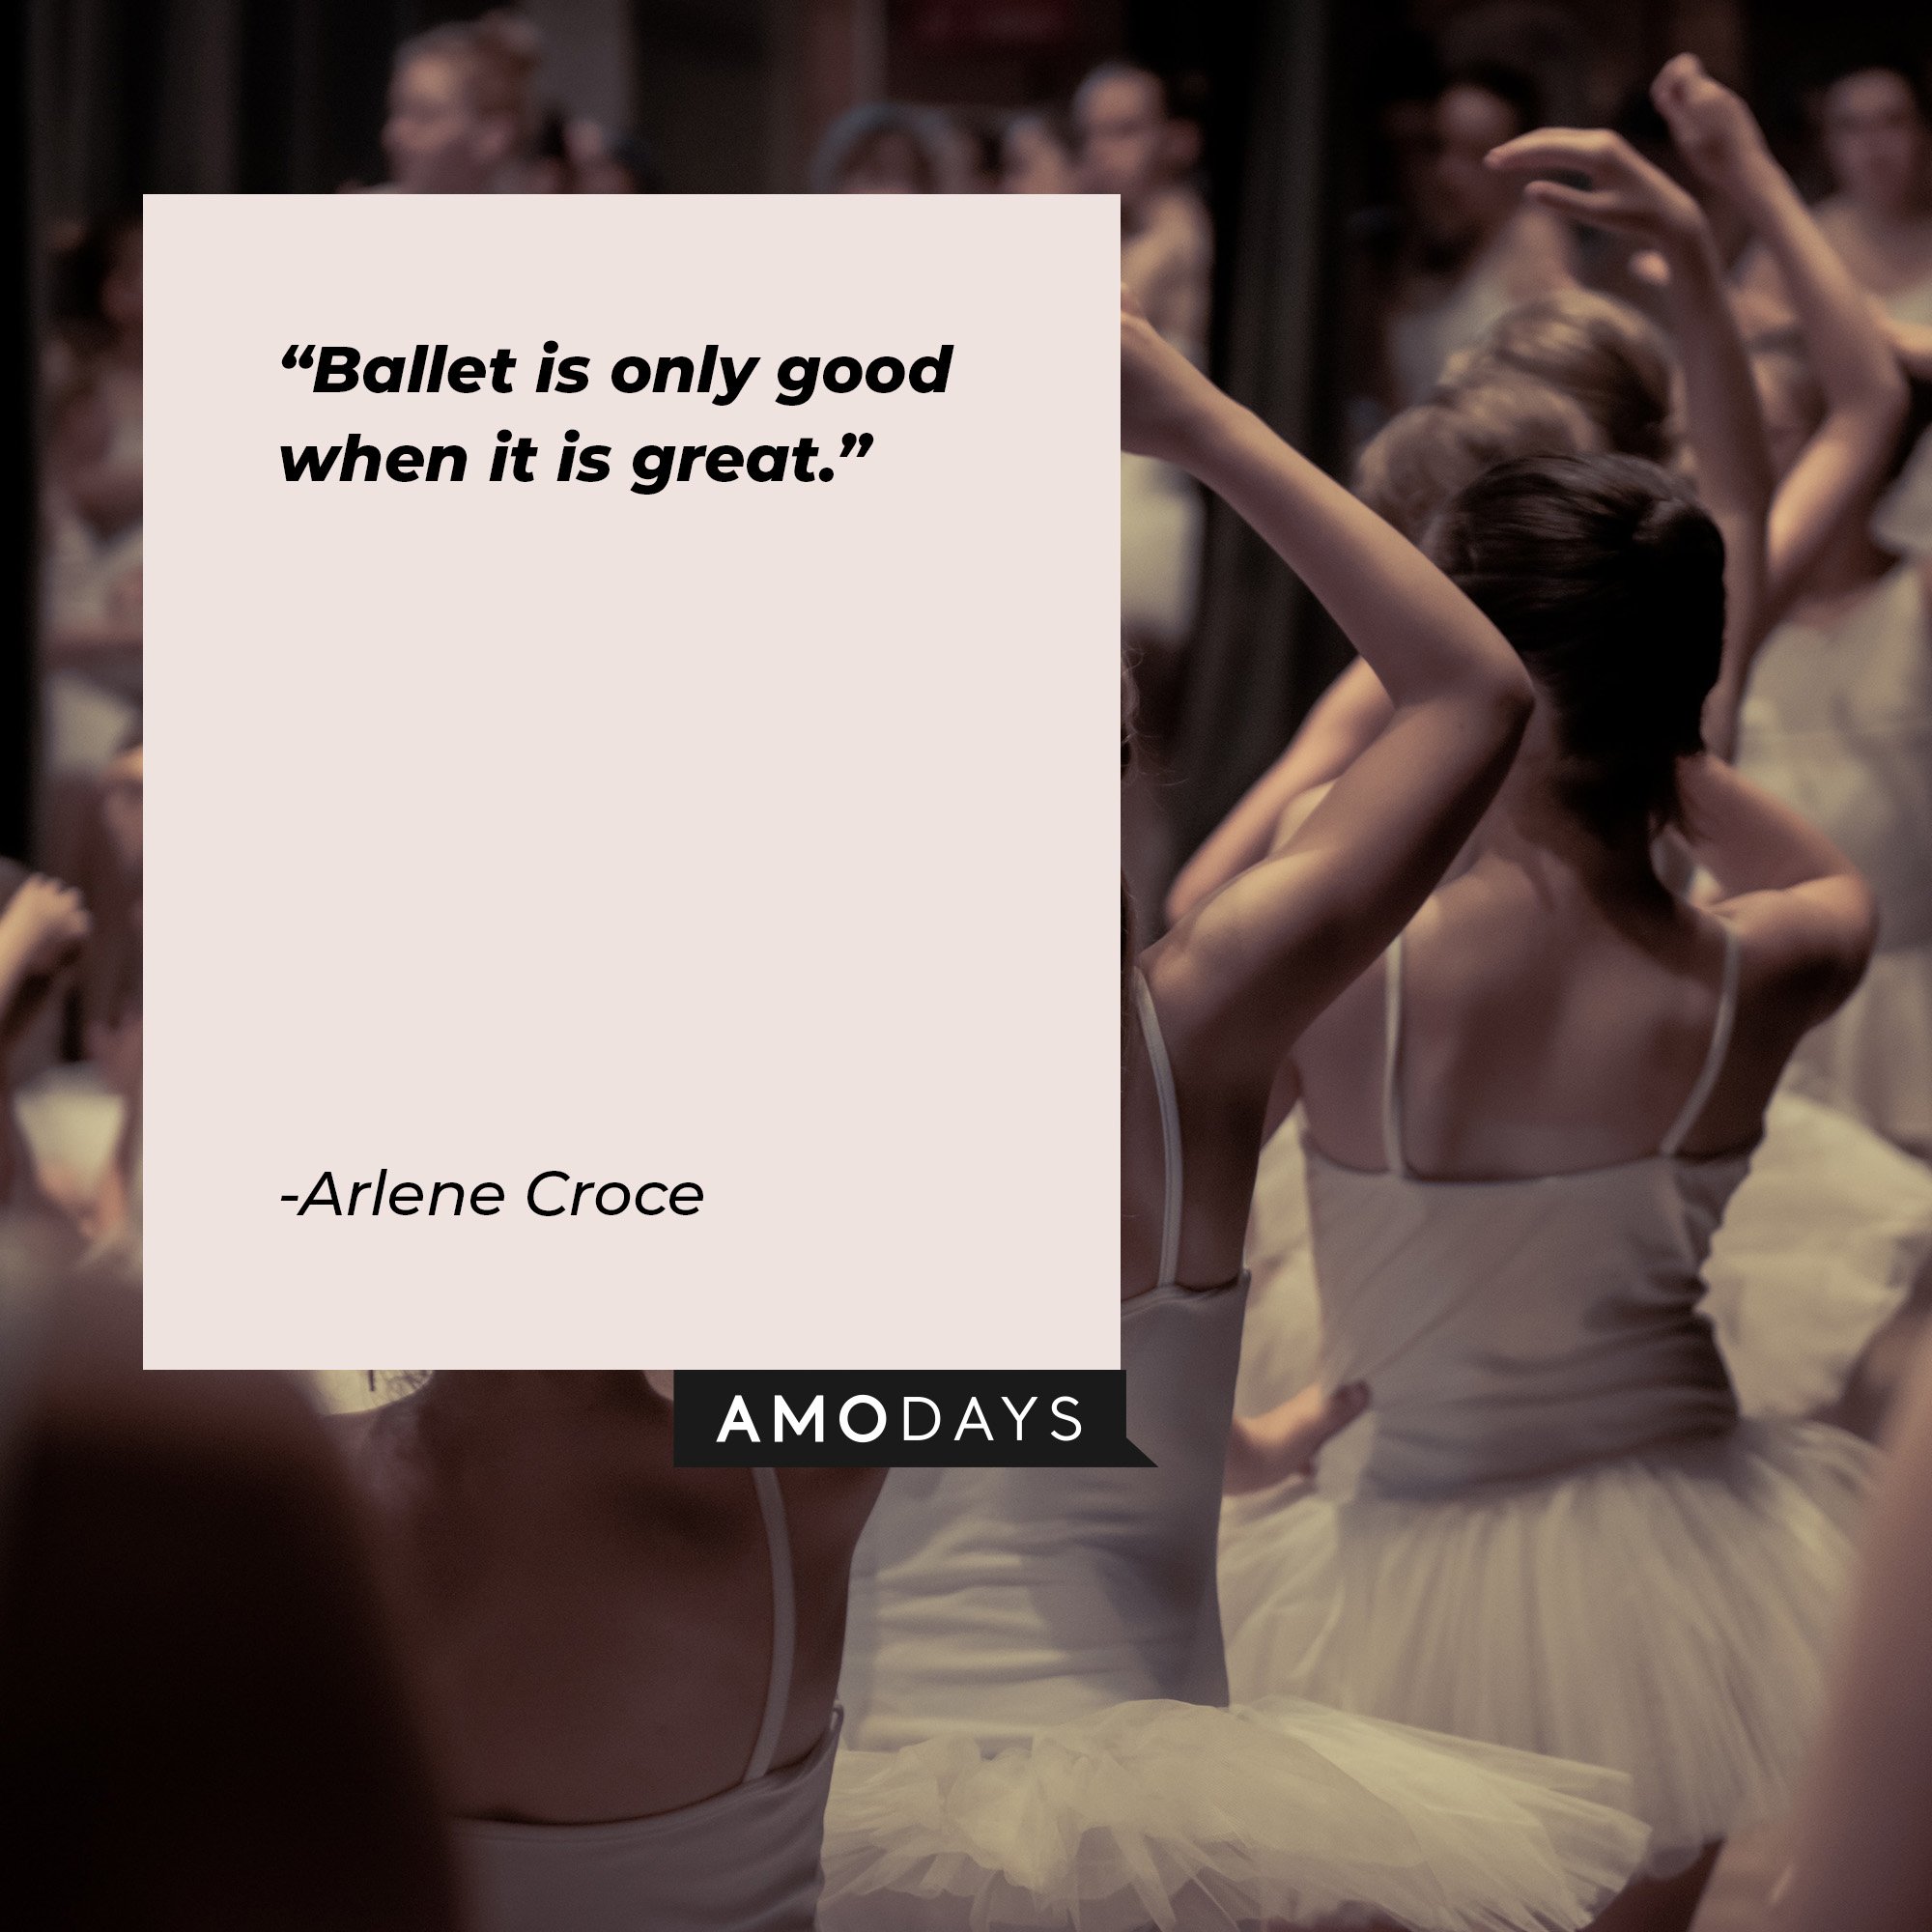  Arlene Croce’s quote: “Ballet is only good when it is great.”  | Image: AmoDays